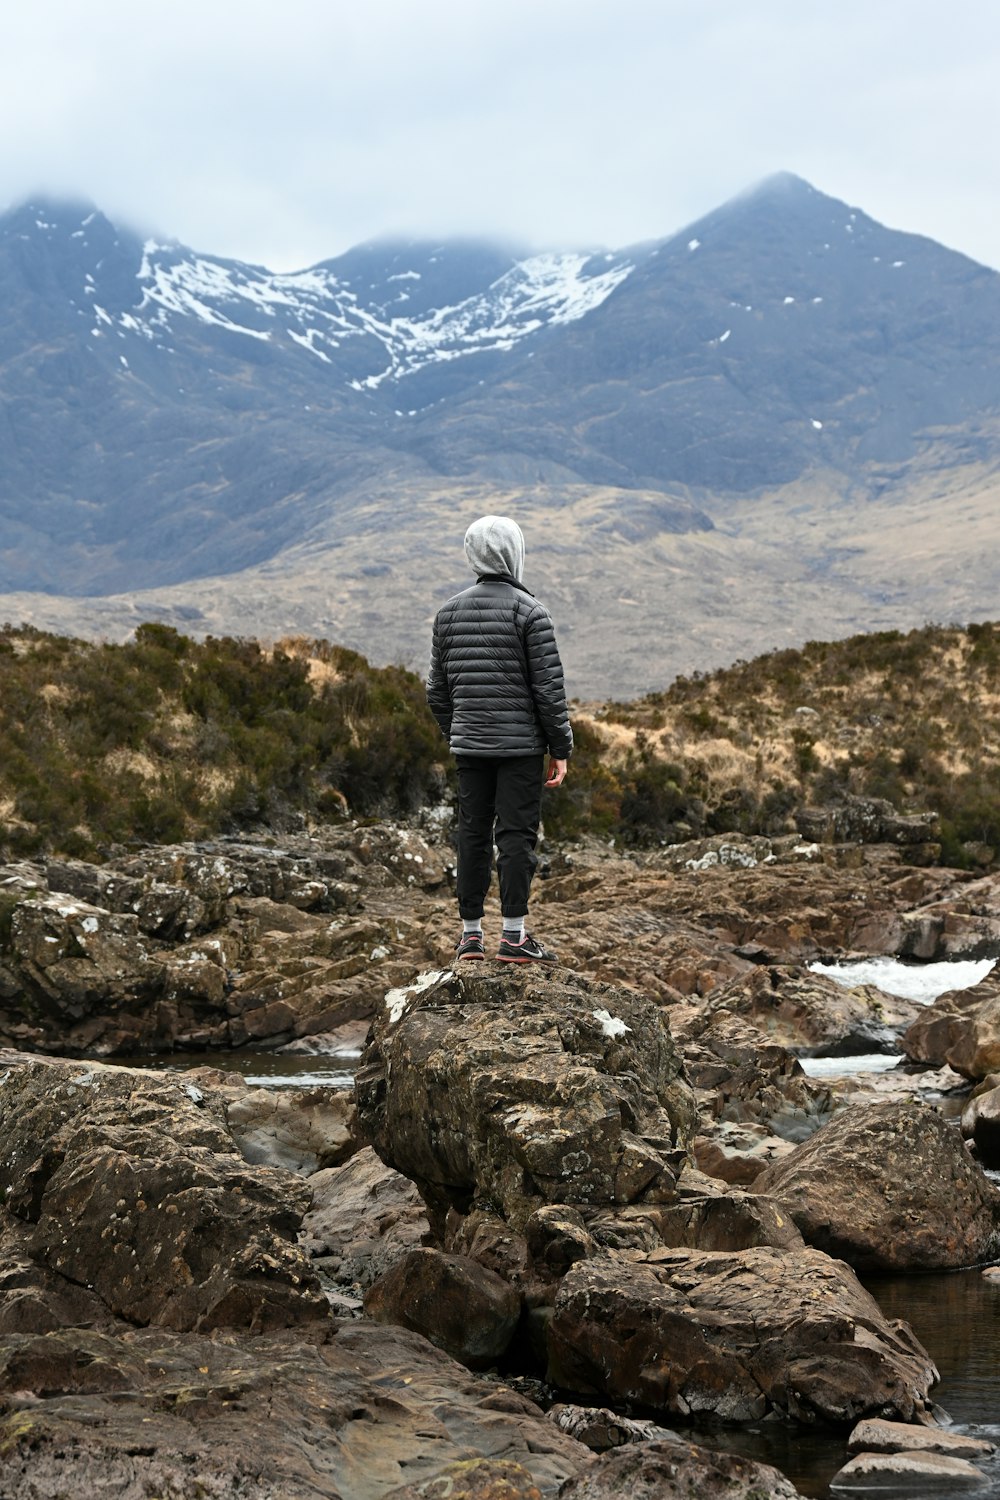 a person standing on a rocky hill overlooking a snowy mountain range